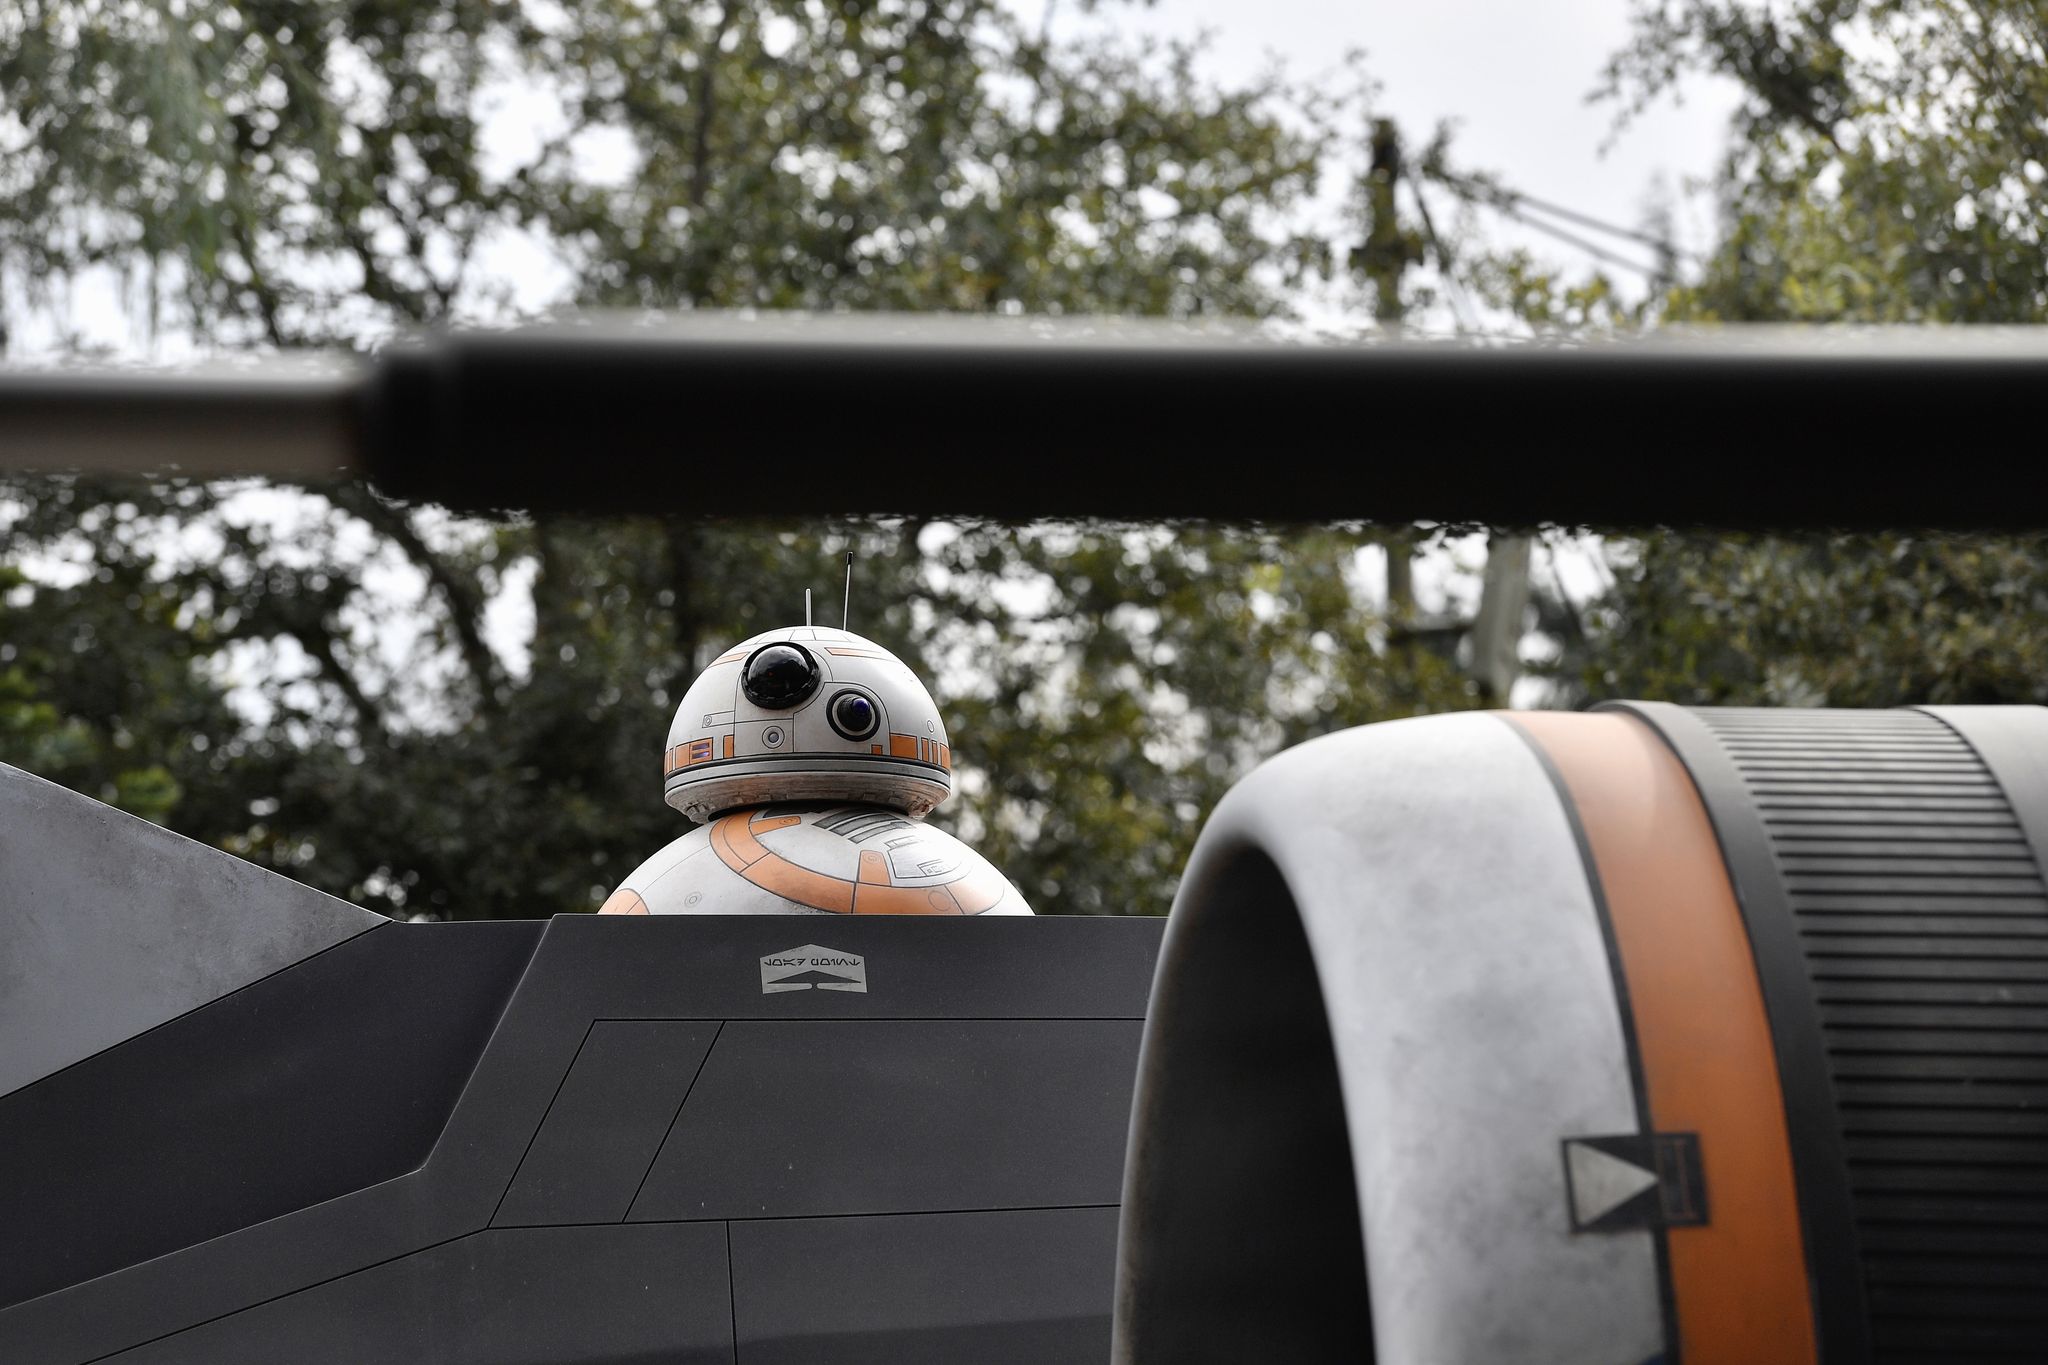 anaheim, ca   january 16 bb 8 sits in an x wing in the queue for rise of the resistance at star wars galaxy"u2019s edge inside disneyland in anaheim, ca, on thursday, jan 16, 2020 "nphoto by jeff gritchen, orange county registerscng